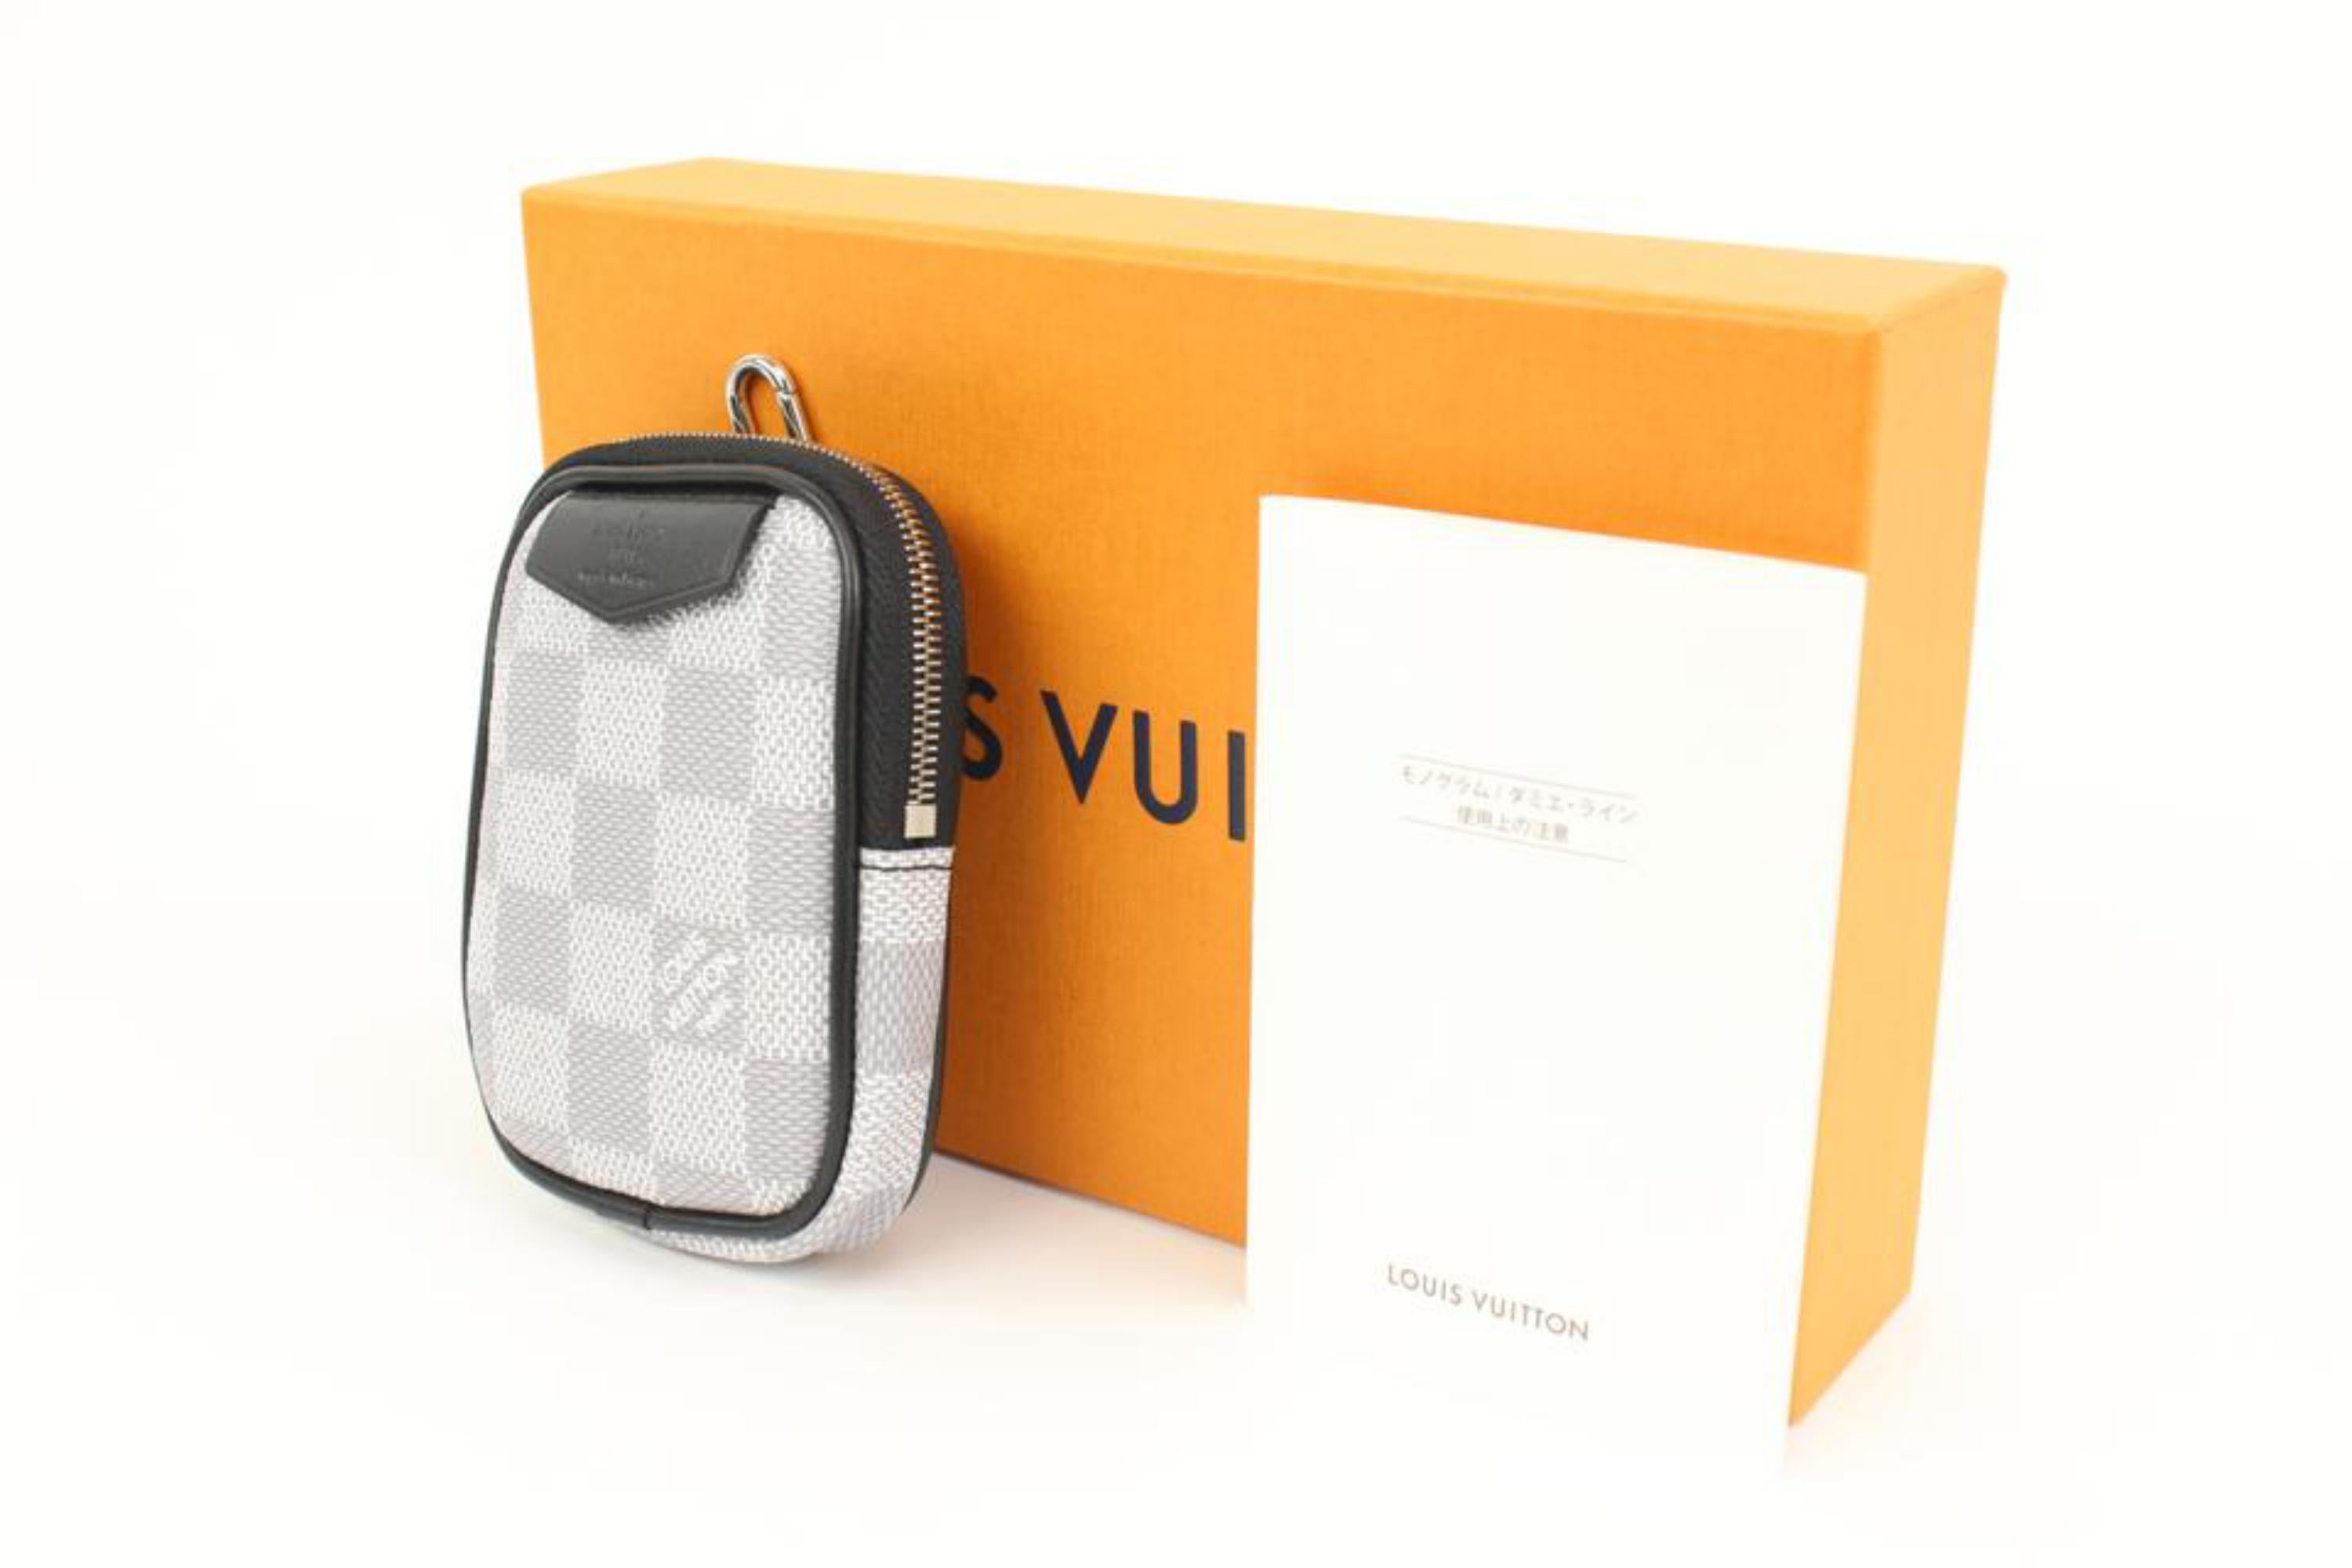 Louis Vuitton Ultra Rare White Damier Graphite Pouch 28lk321s
Date Code/Serial Number: SP4250
Made In: France
Measurements: Length:  3